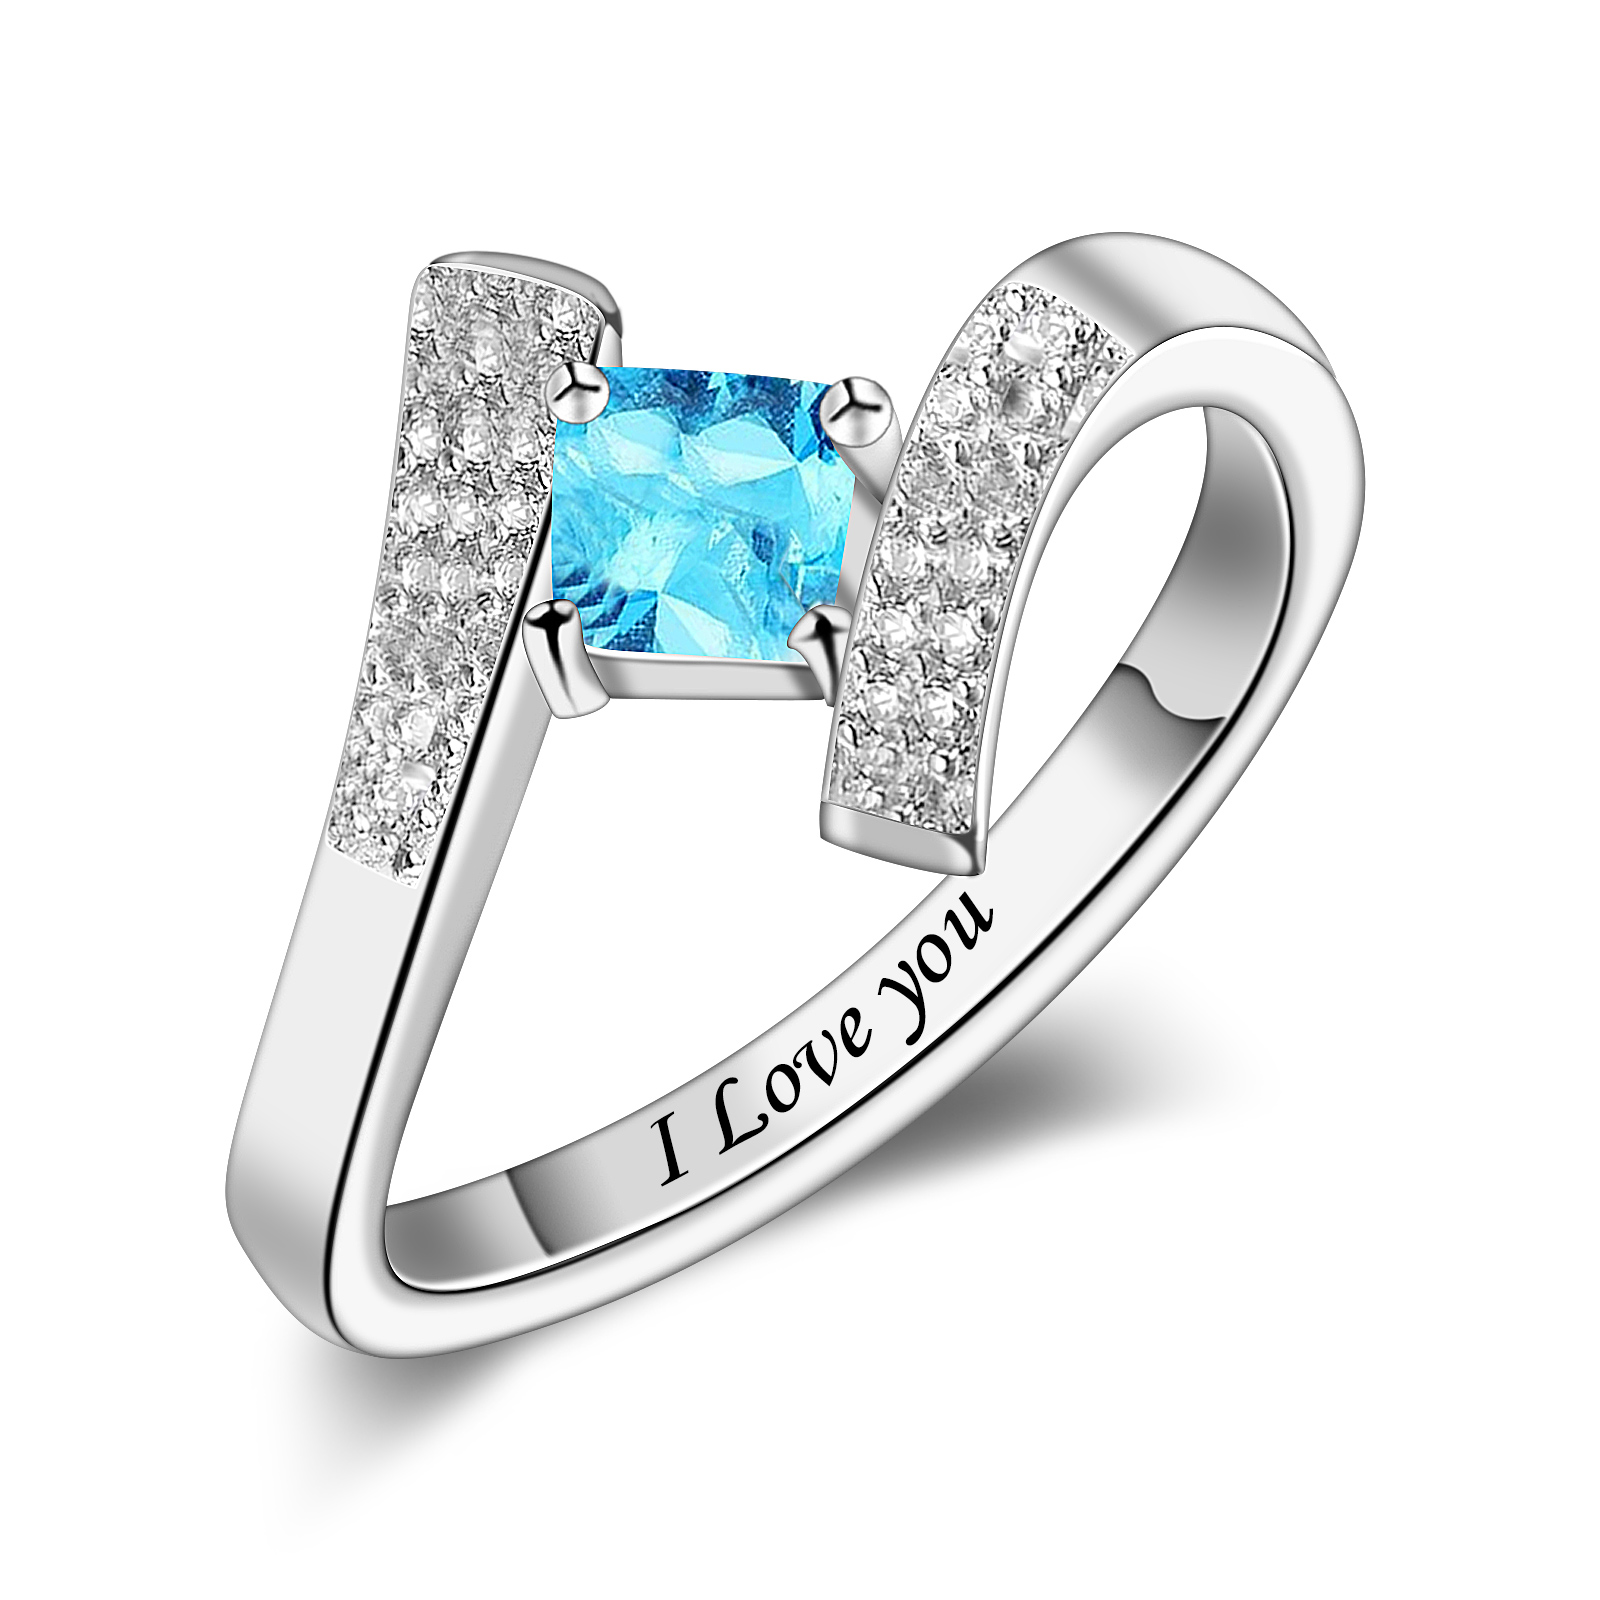 R5-1-1 Personalized Mothers Ring Birthstone and Engraved Name (1-9 Stones)